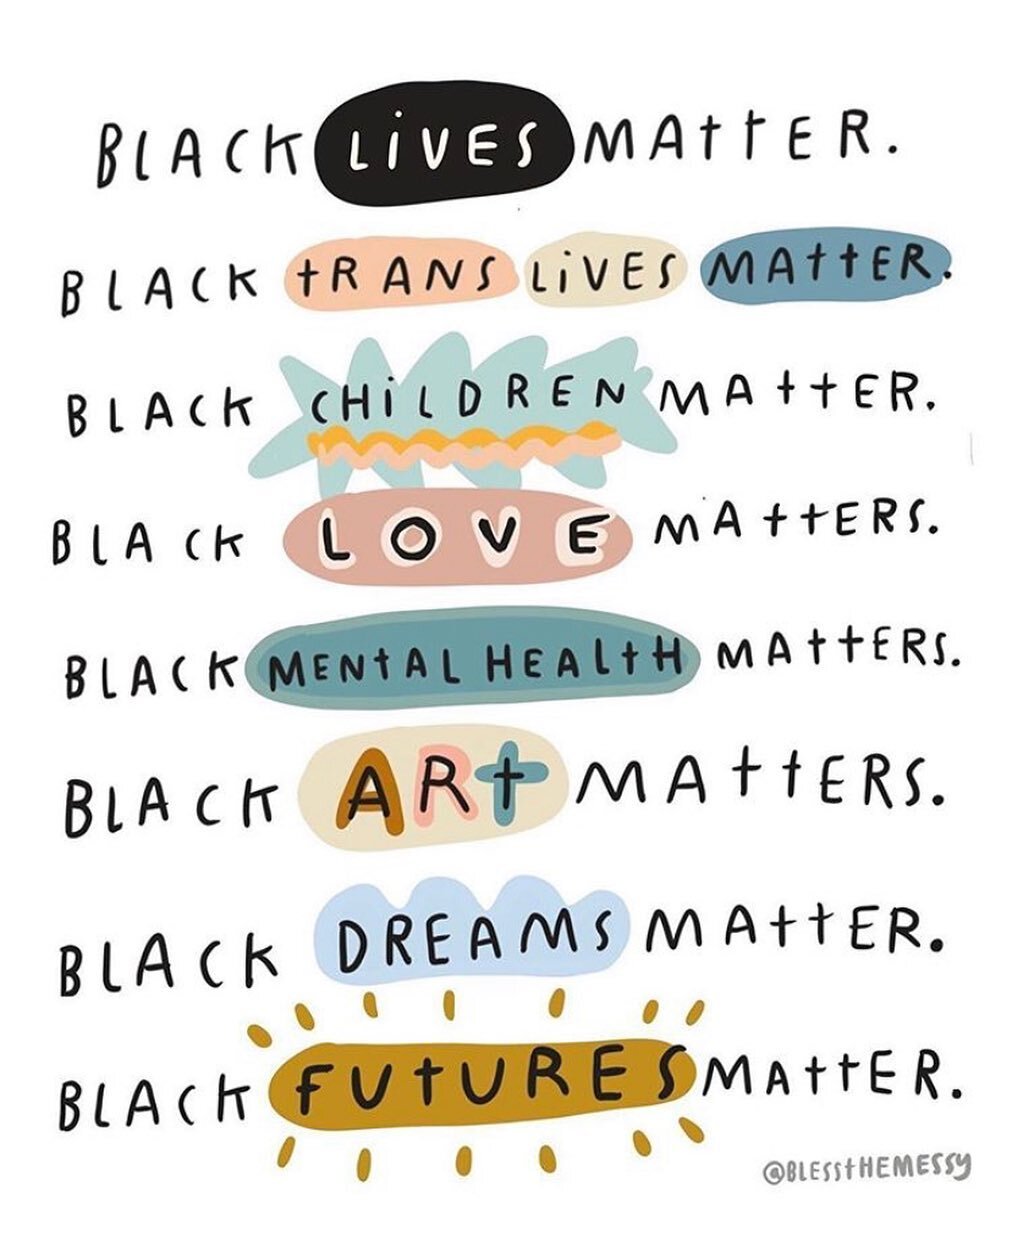 A Saturday reminder from our friends at @hairholisticstudio. Art from @blessthemessy 🖤